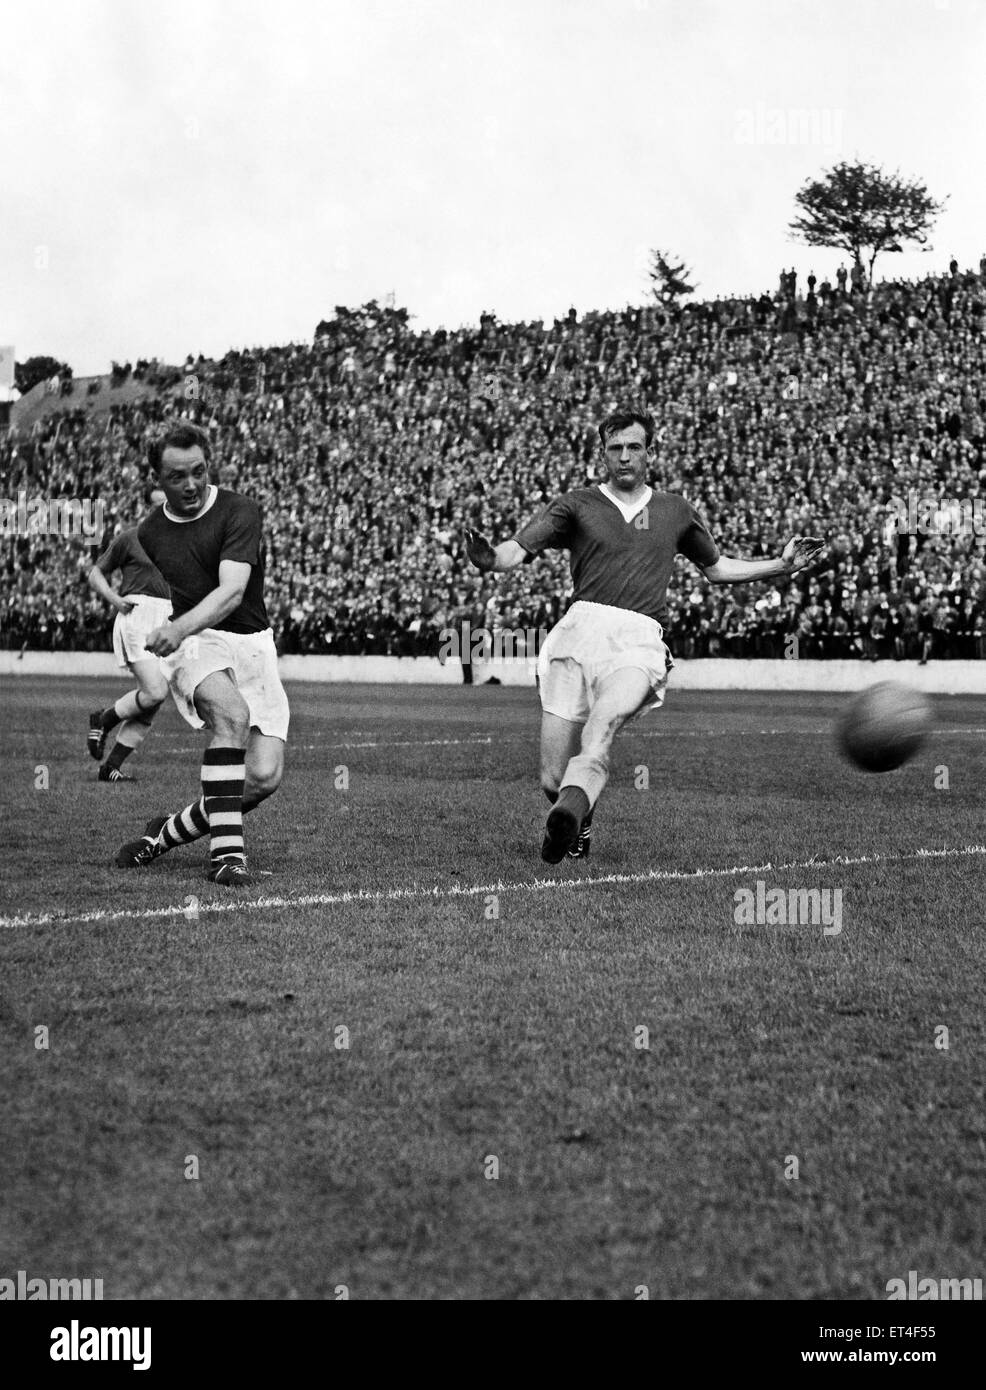 Jimmy Gauld, Charlton Athletic's inside right, (left) shoots for goal, while an Everton defender rushes in to intercept.  29th September 1956. Stock Photo